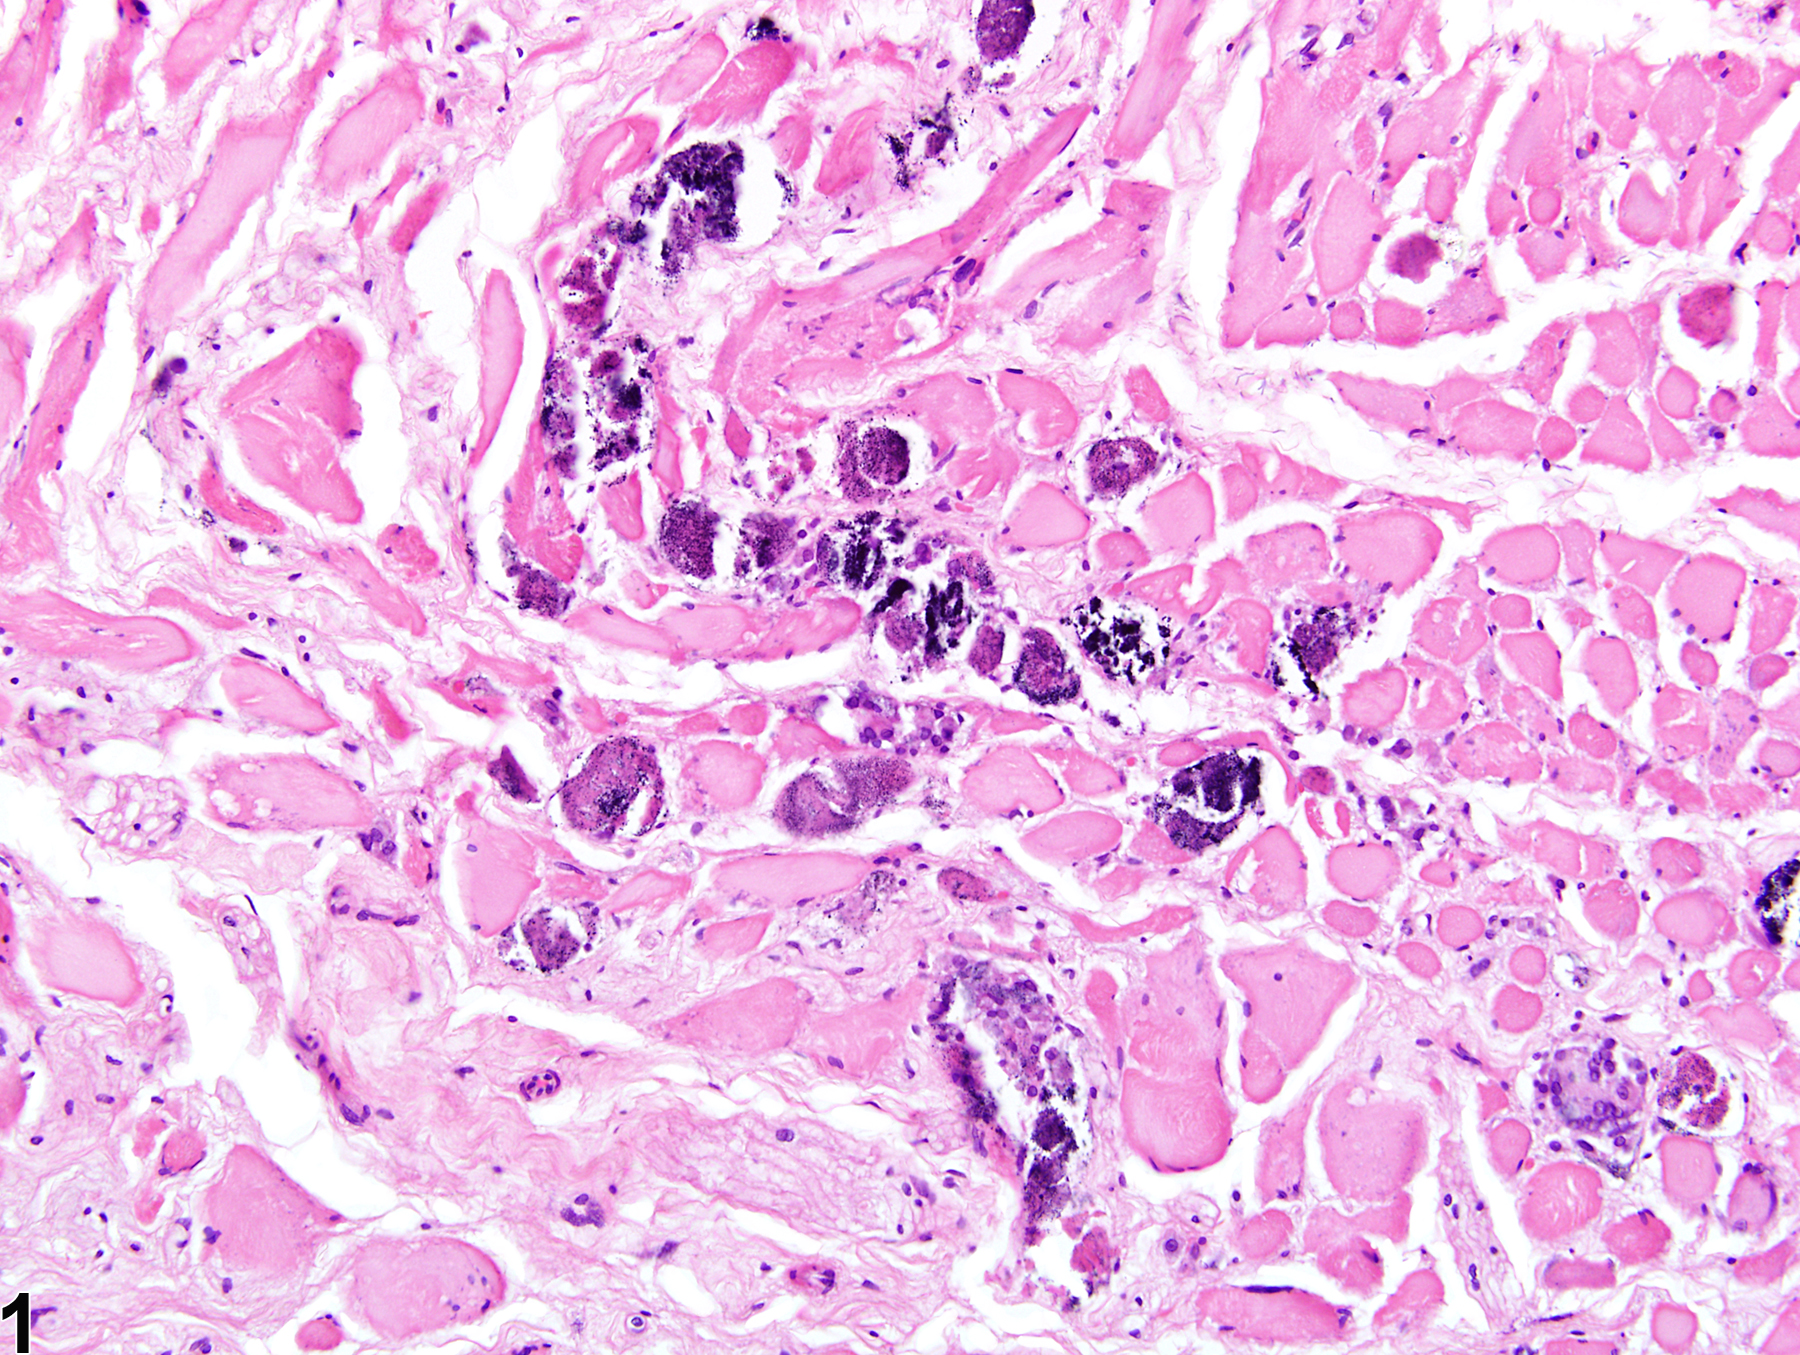 Image of mineralization in the skeletal muscle from a male F344/N rat in a chronic study